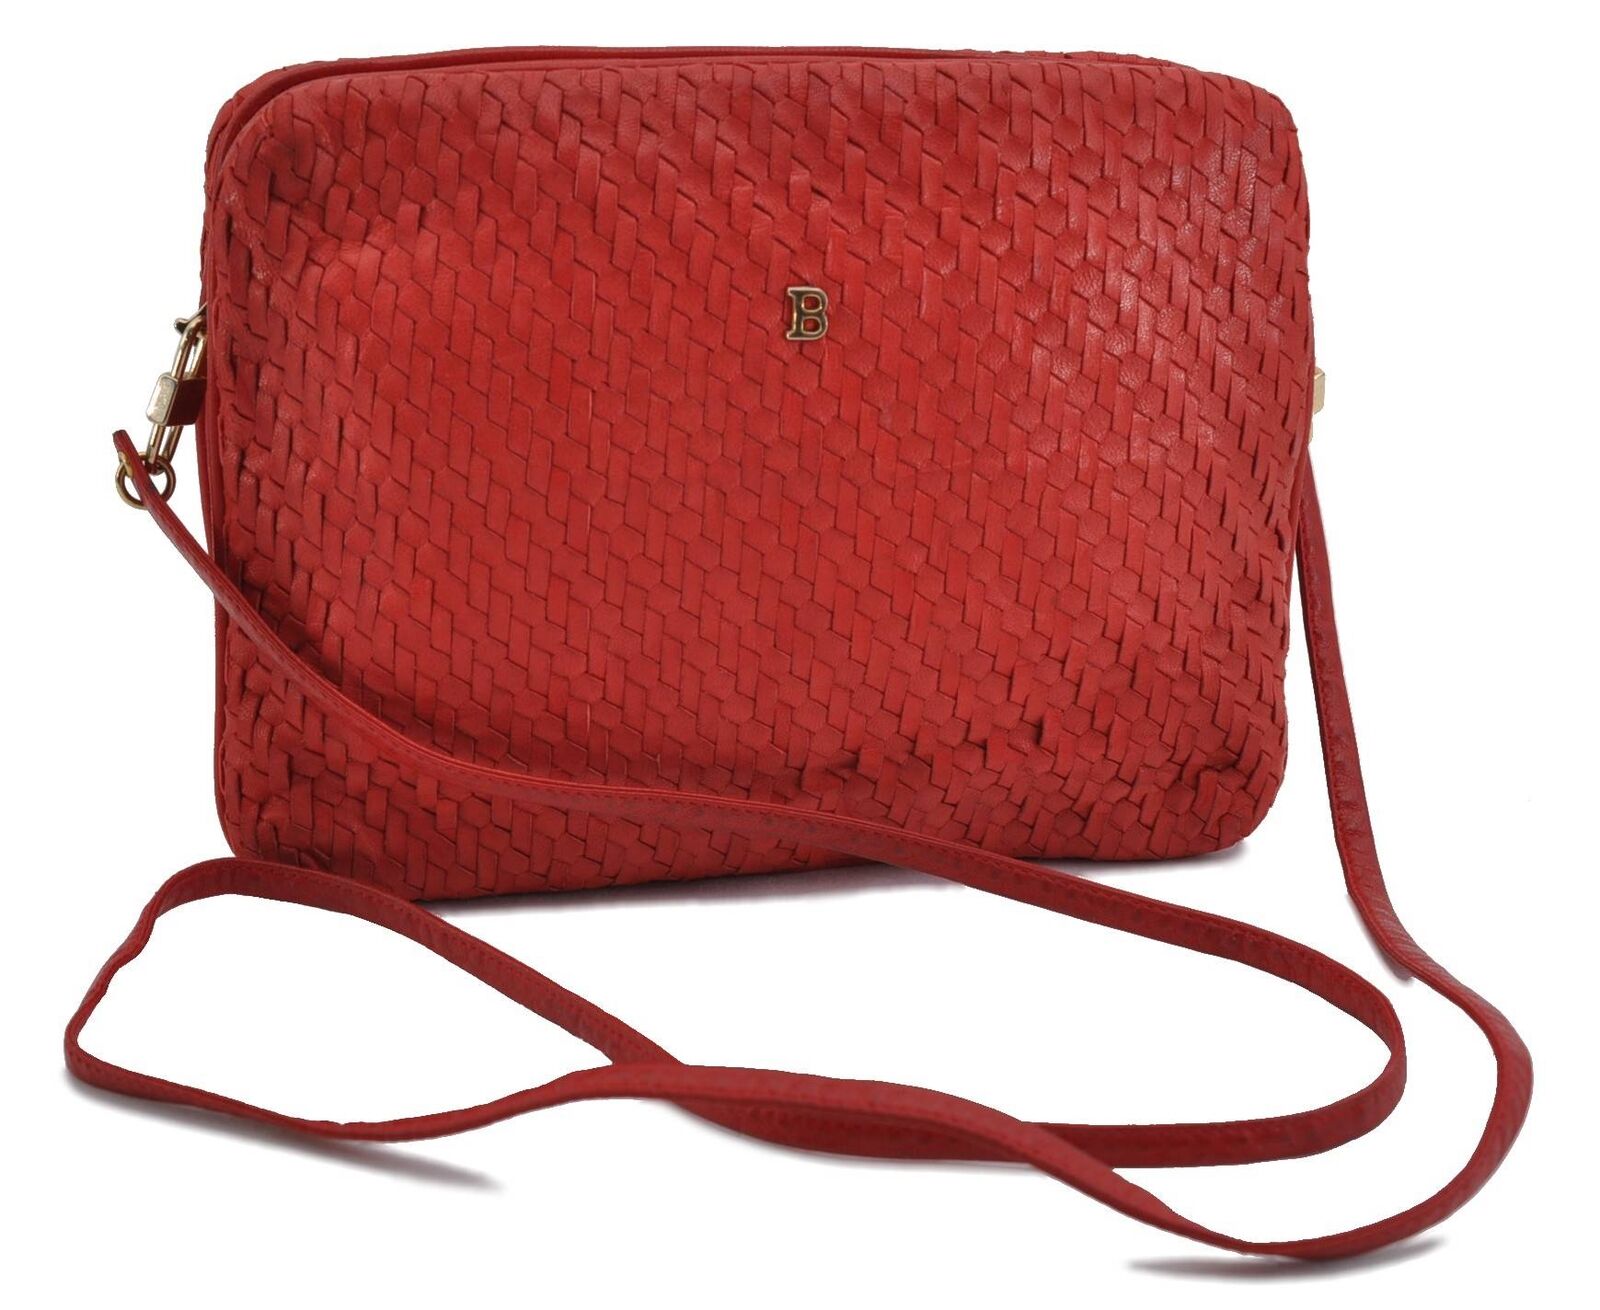 Authentic BALLY Leather Shoulder Cross Body Bag Red 1365B